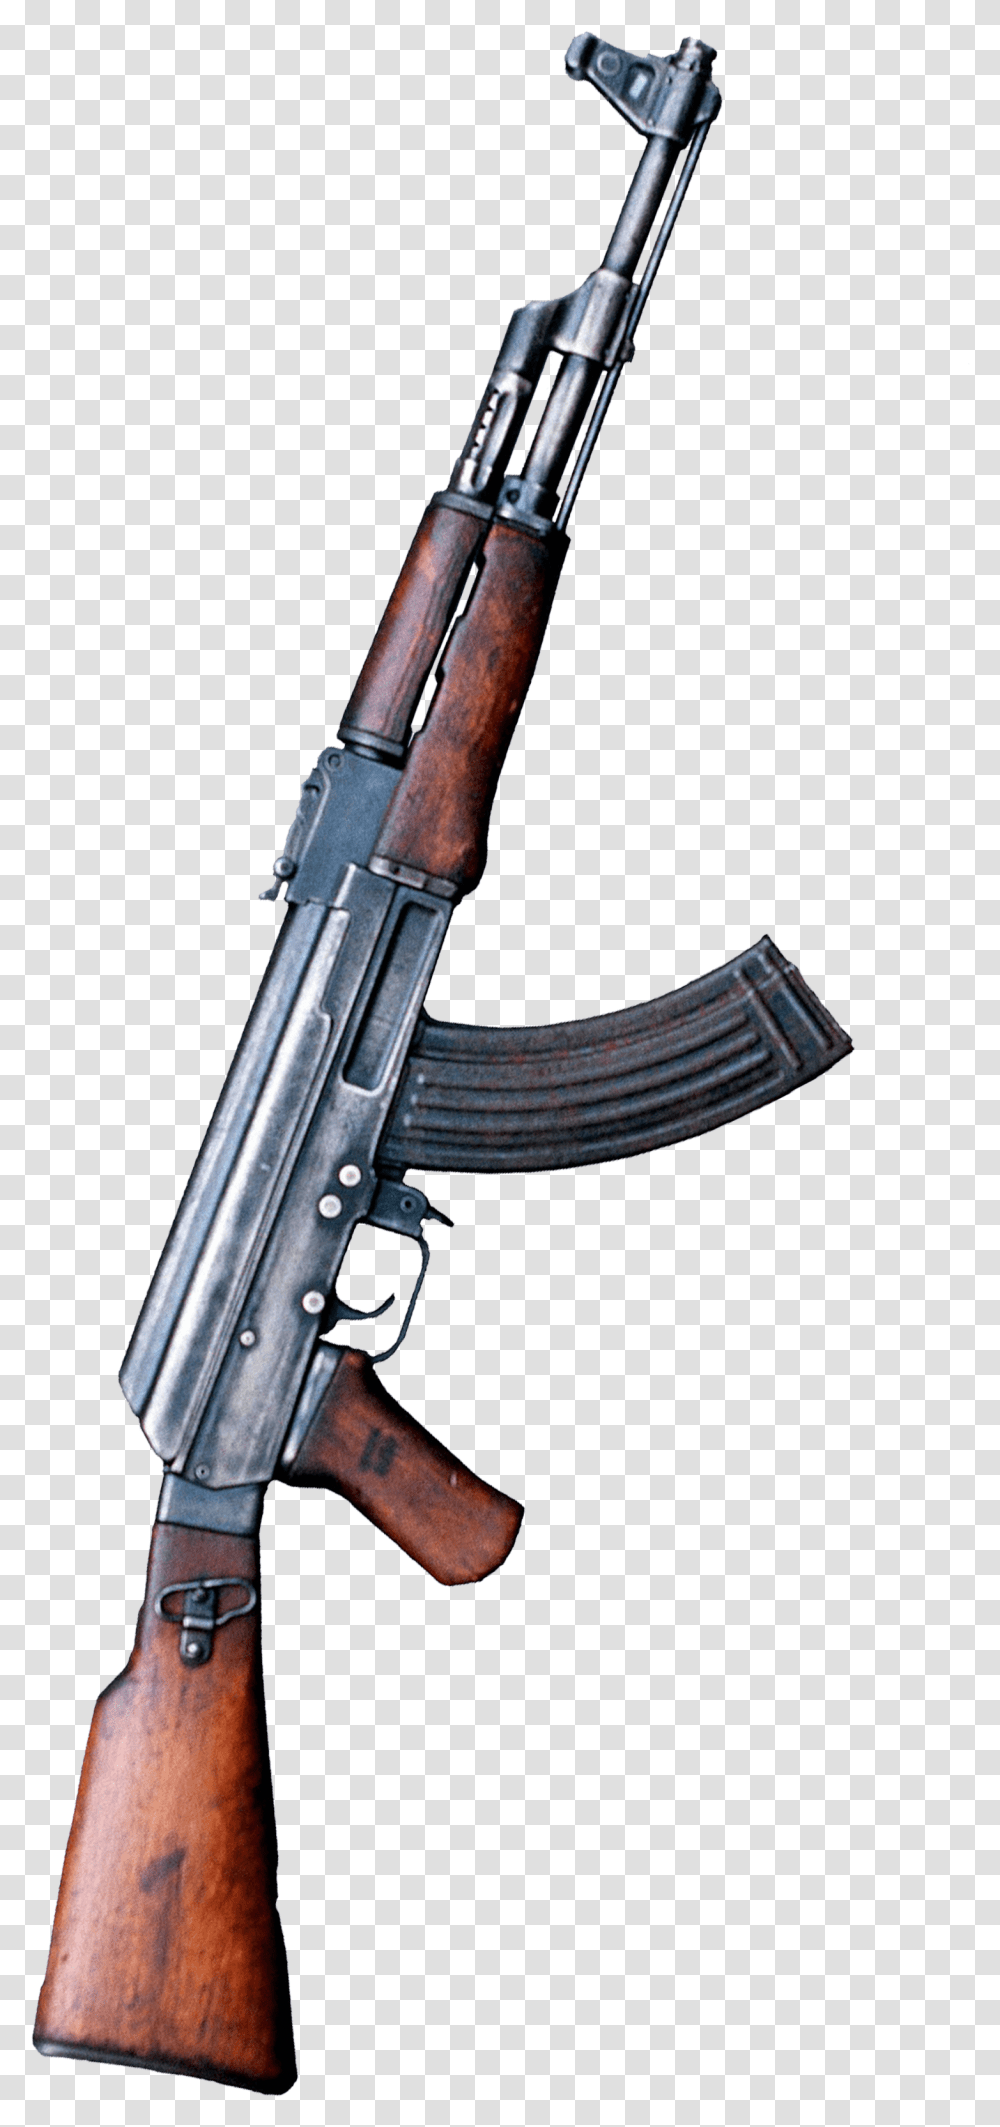 Pubg Image For Editing Pubg Guns For Editing, Axe, Tool, Weapon, Weaponry Transparent Png